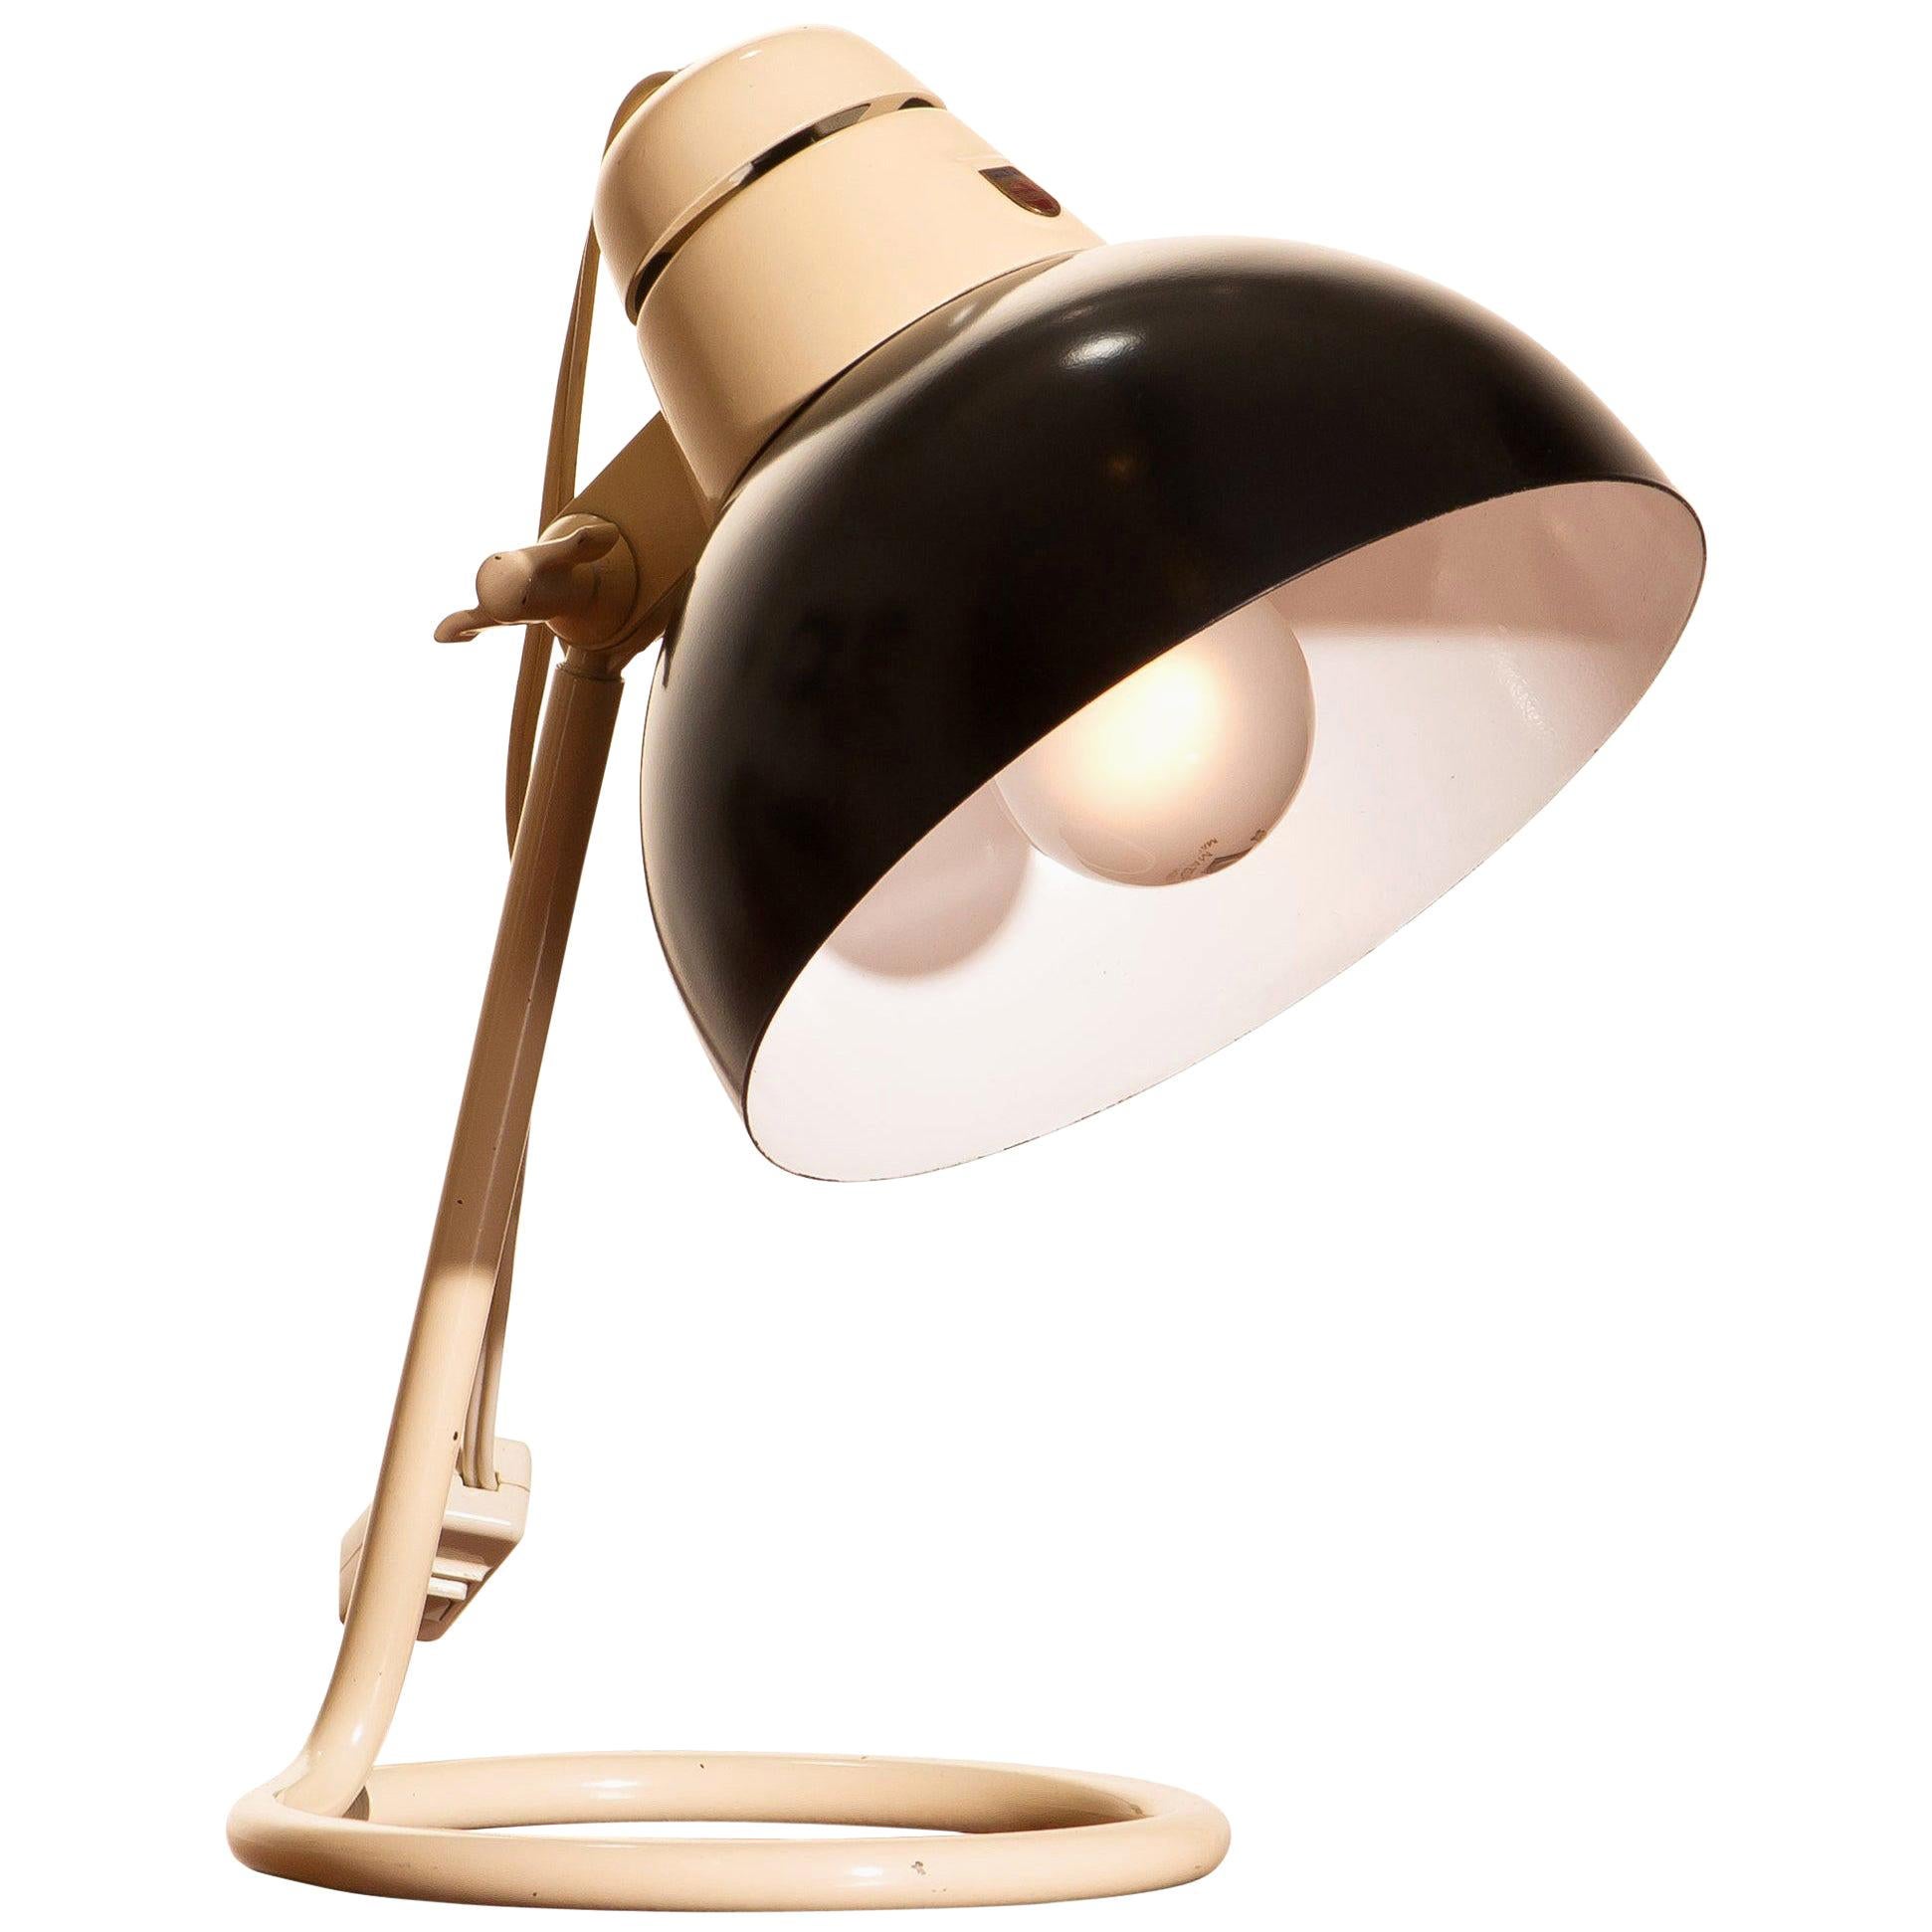 Beautiful desk or table lamp in off-white and black lacquered metal and in very nice condition produced by Philips.
Labelled.
Period: 1950
The dimensions are height 33 cm, 13 inch, diameter shade 20 cm, 8 inch.